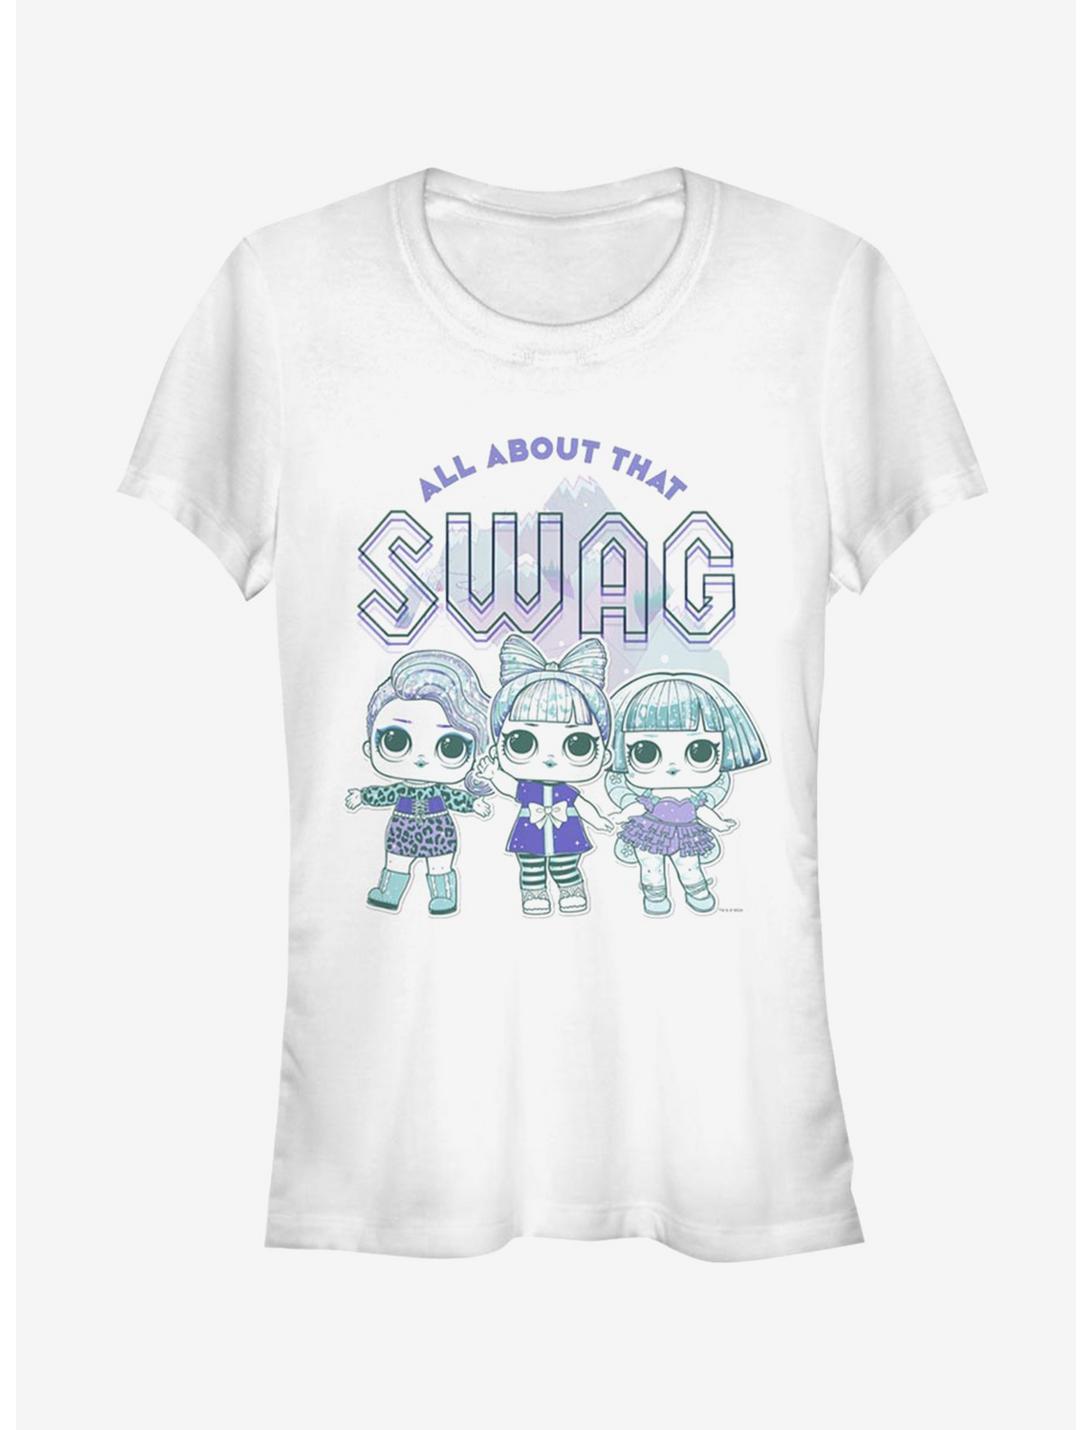 L.O.L. Surprise! All About Swag Girls T-Shirt, WHITE, hi-res